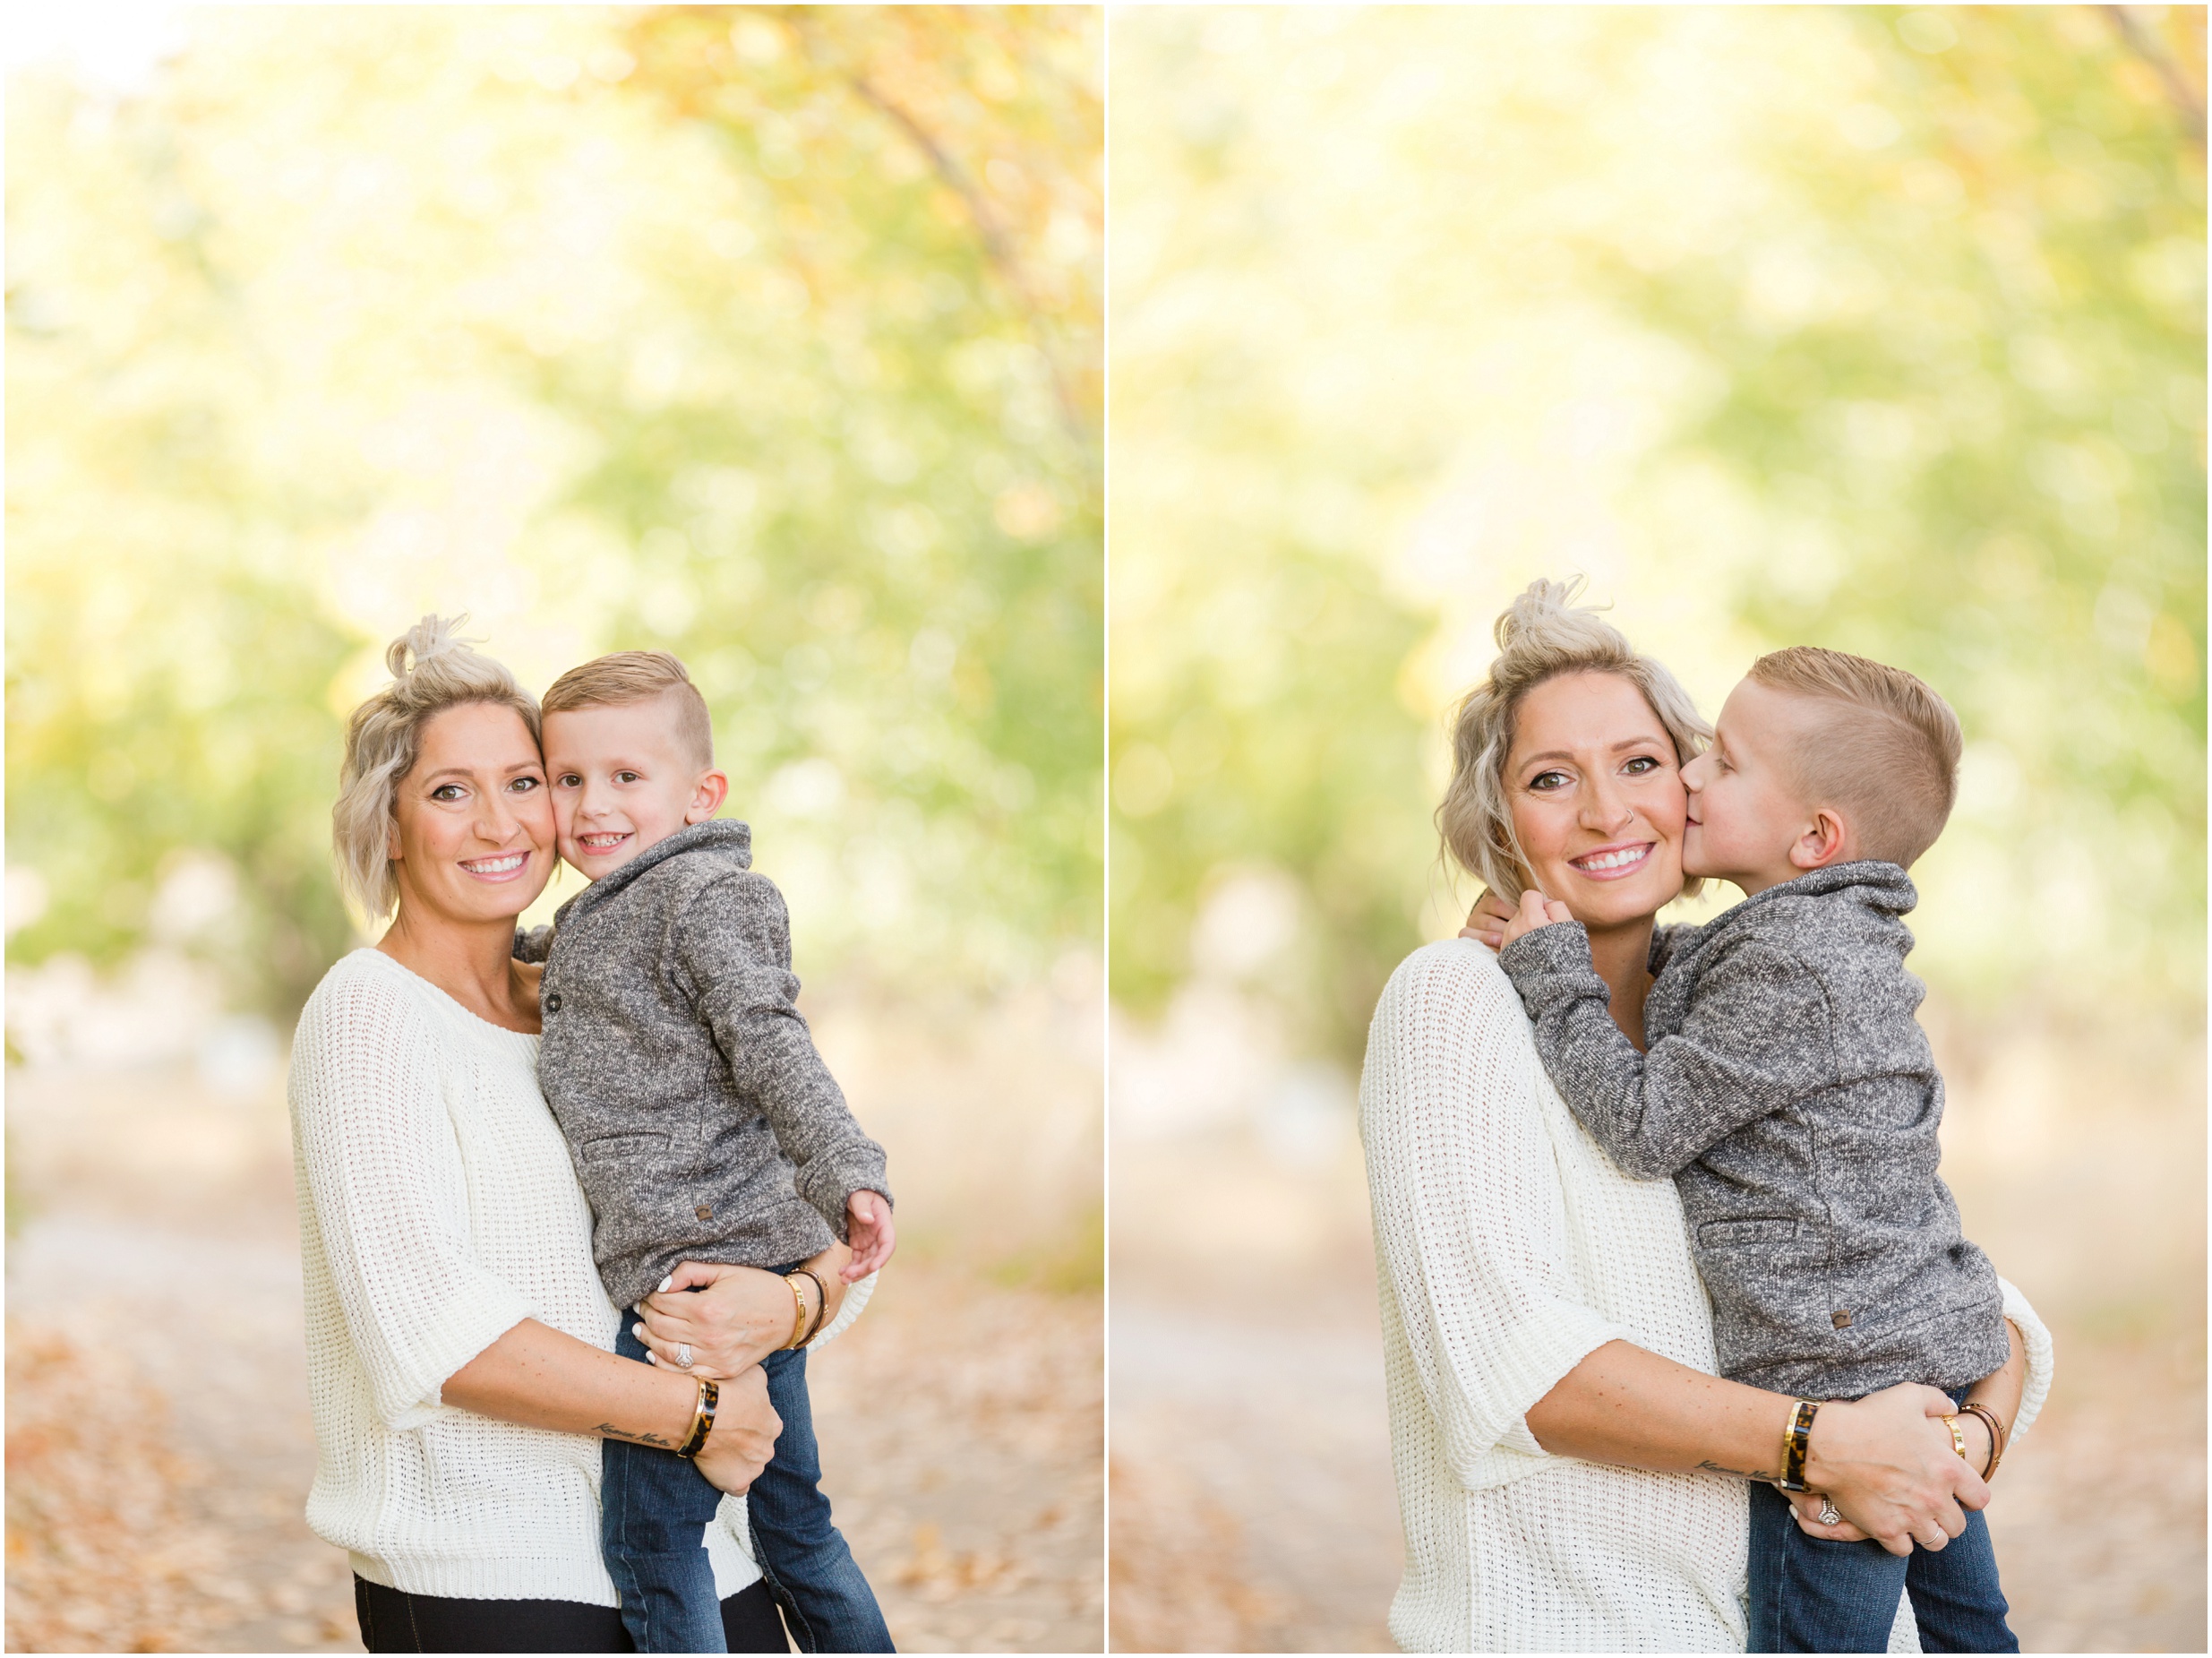 medicine hat family photographer, fall family photos, nc photography, edmonton family photographer, what to wear for fall family photos